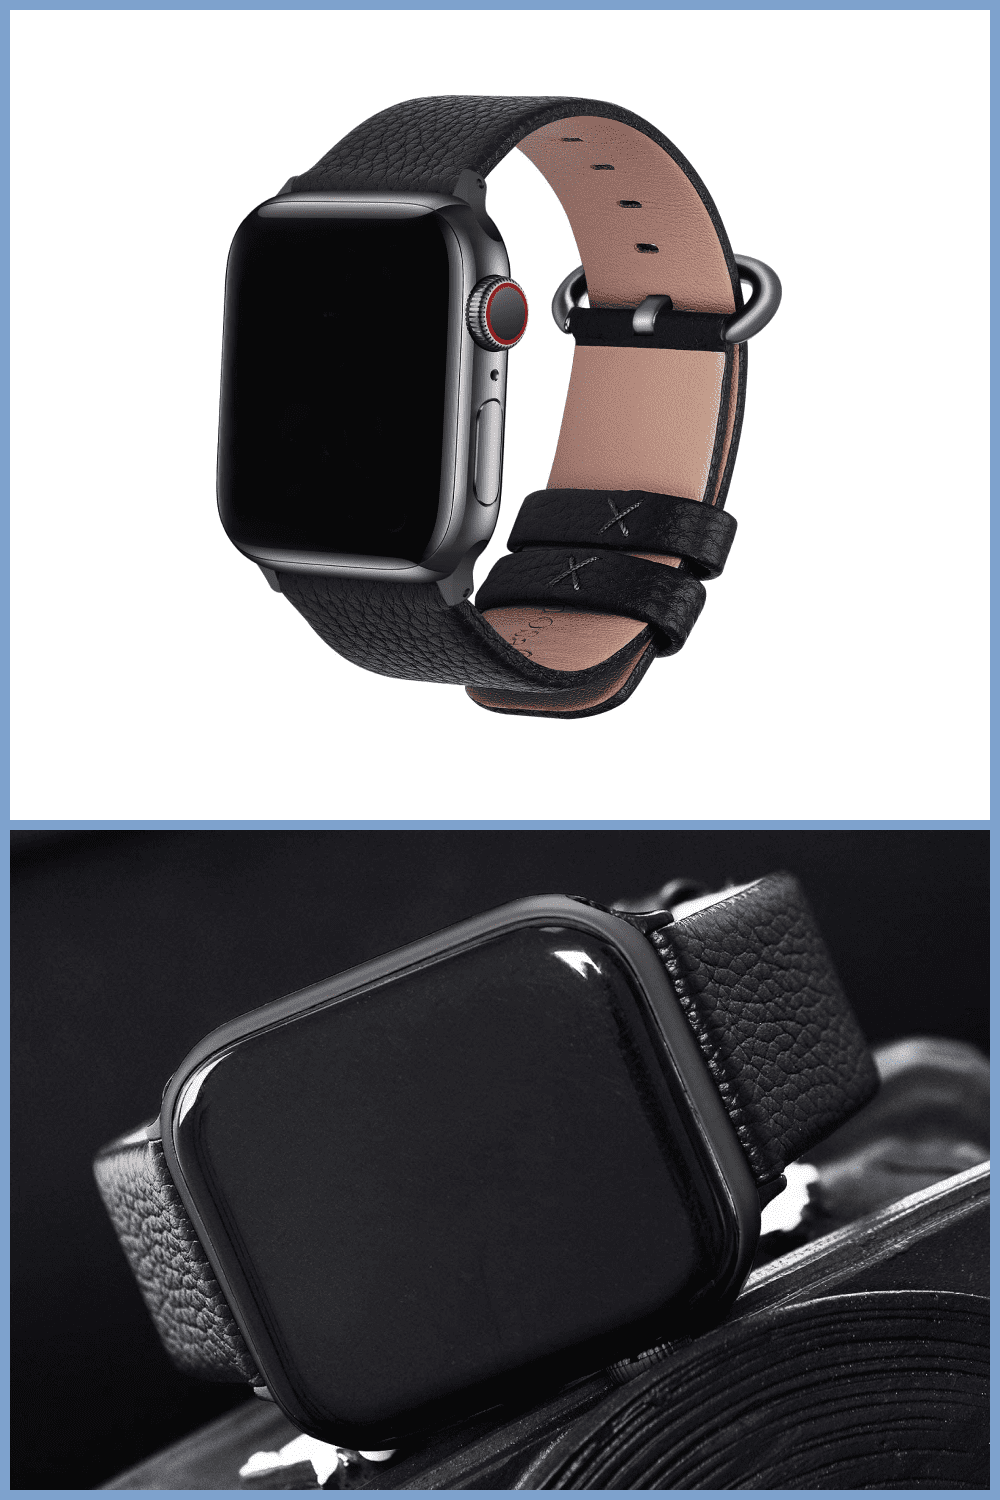 Apple Watches with black leather band.